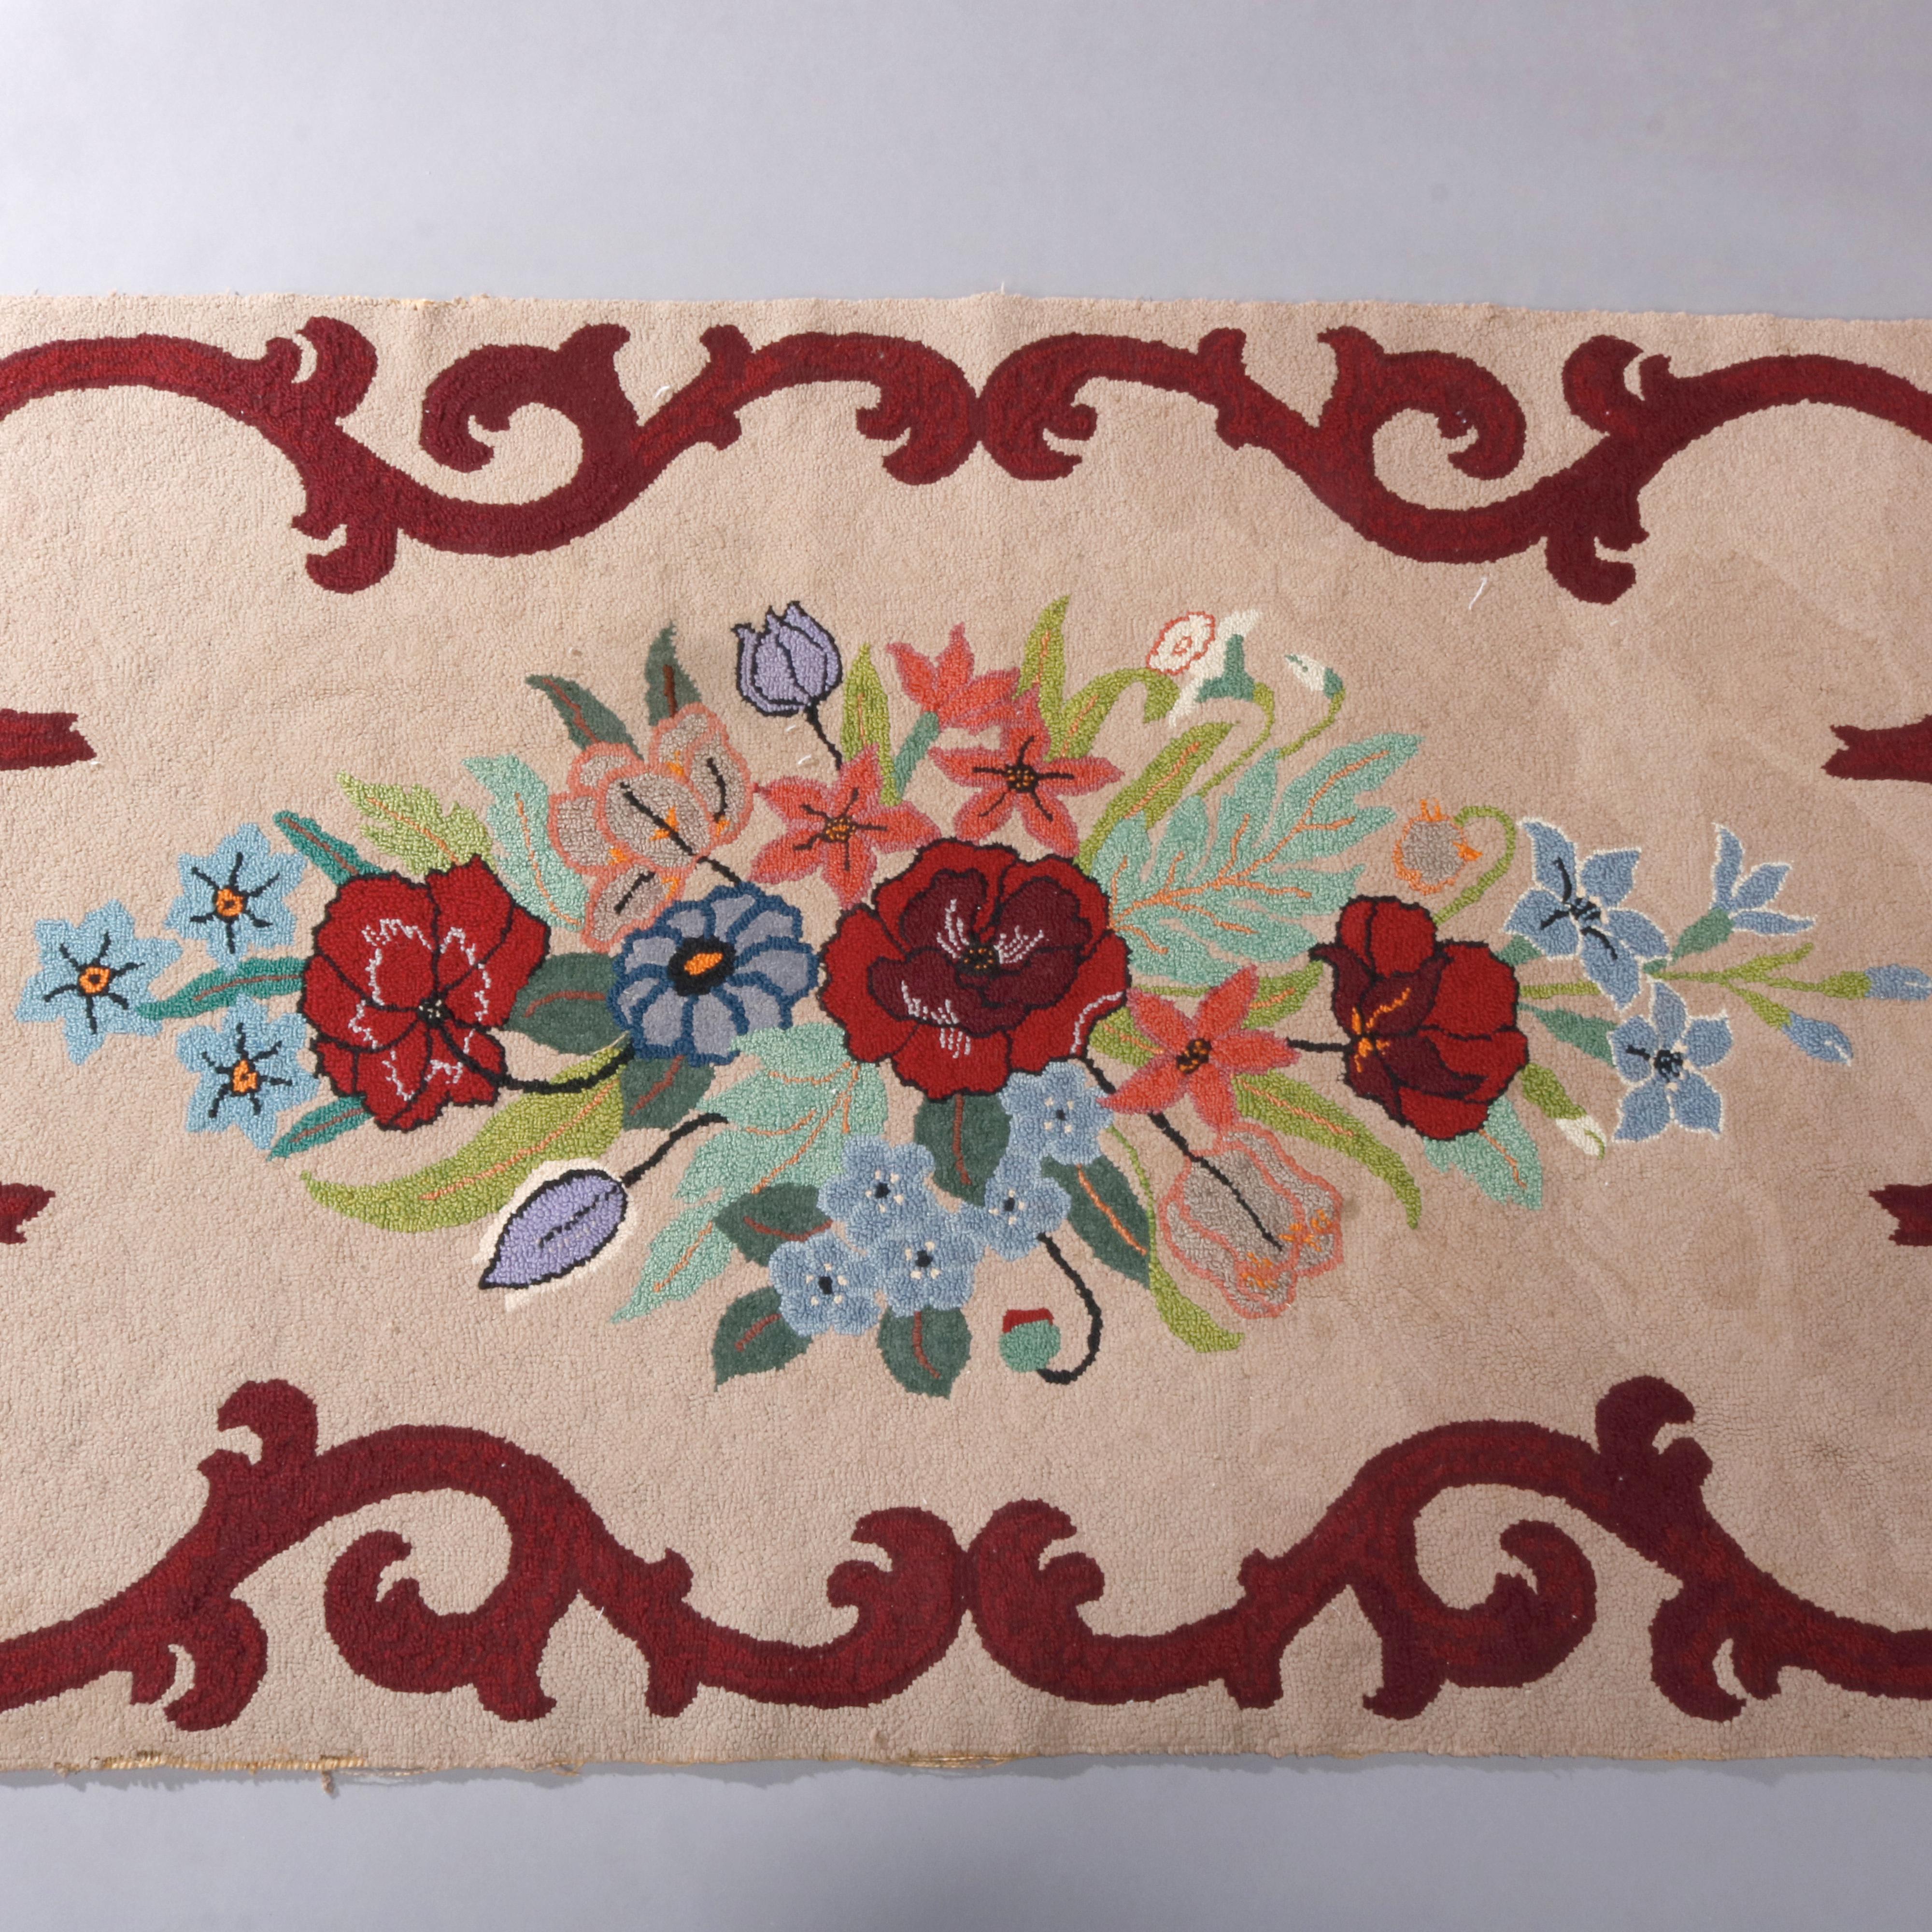 An antique French hooked rug offers central floral reserve with scroll and foliate border, circa 1930

Measures: 53